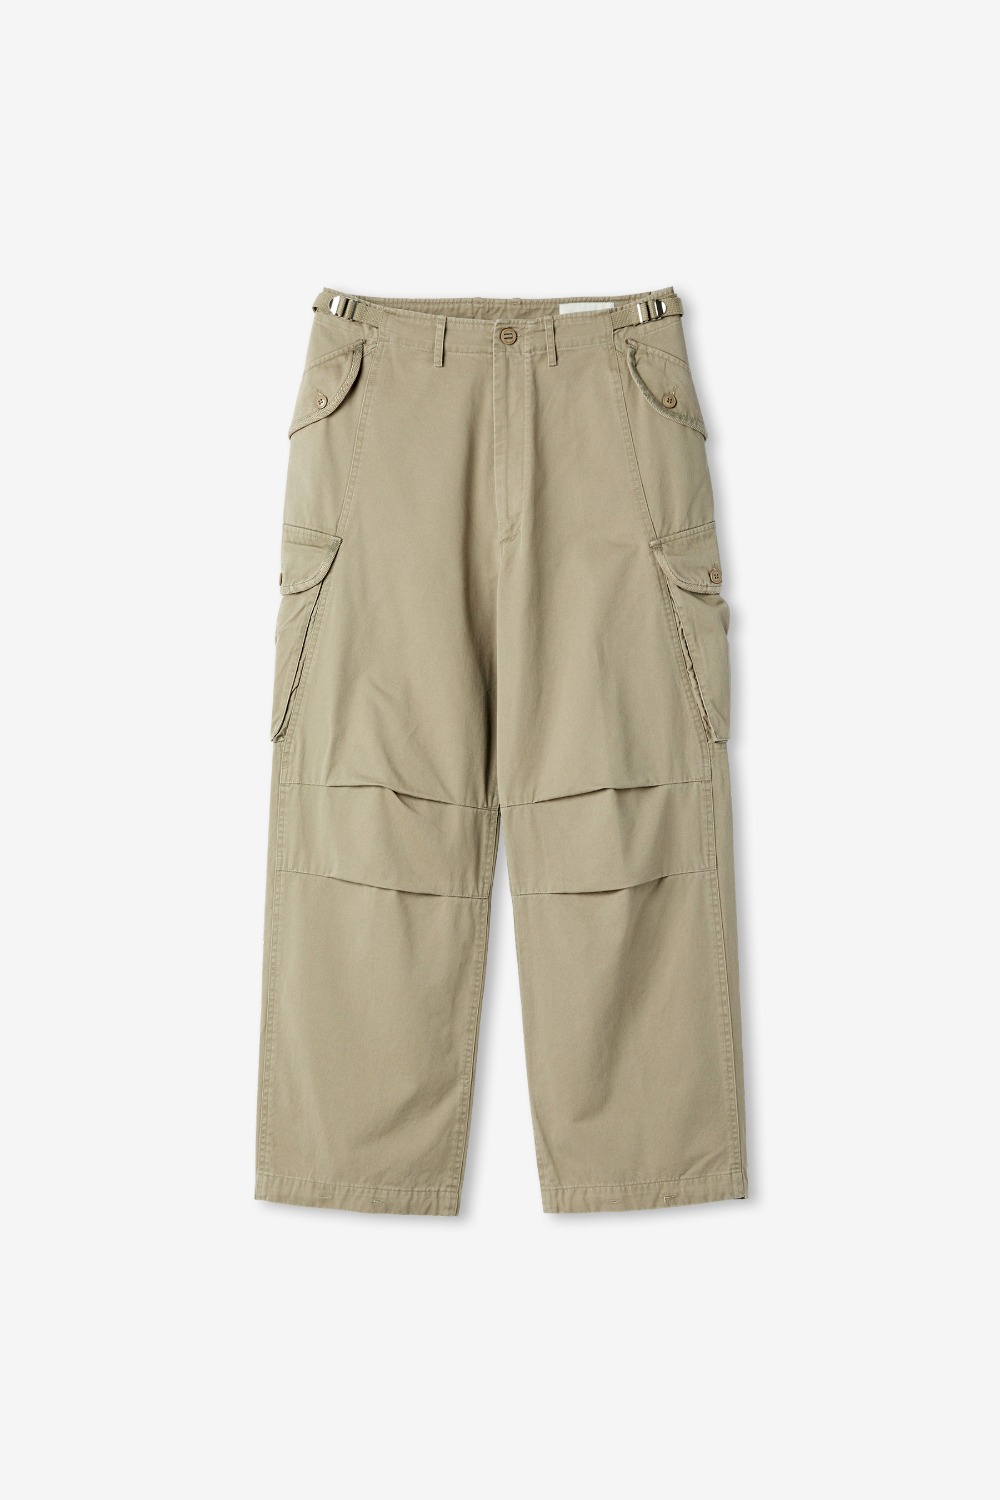 OYSTER M-74 WASHED CARGO PANTS (ECP GARMENT PROCESS)